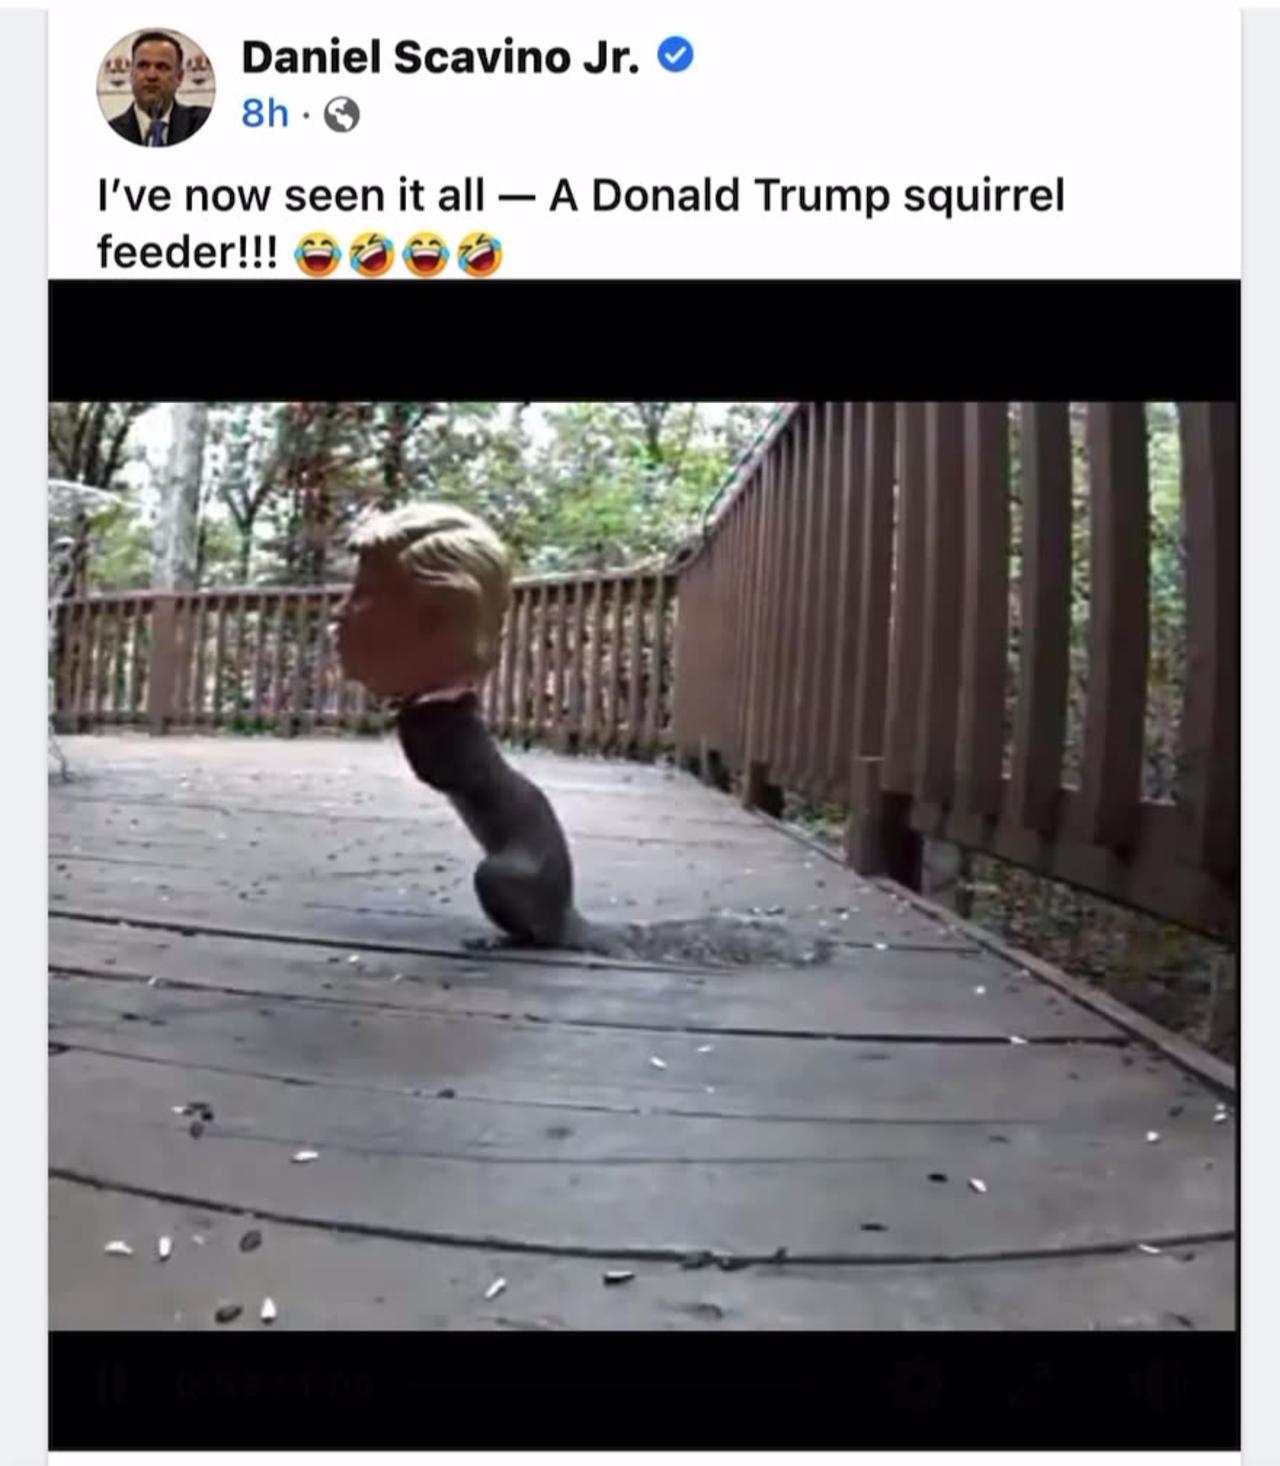 Scavino: I've seen it all now - A Donald Trump squirrel feeder!!! 🤣